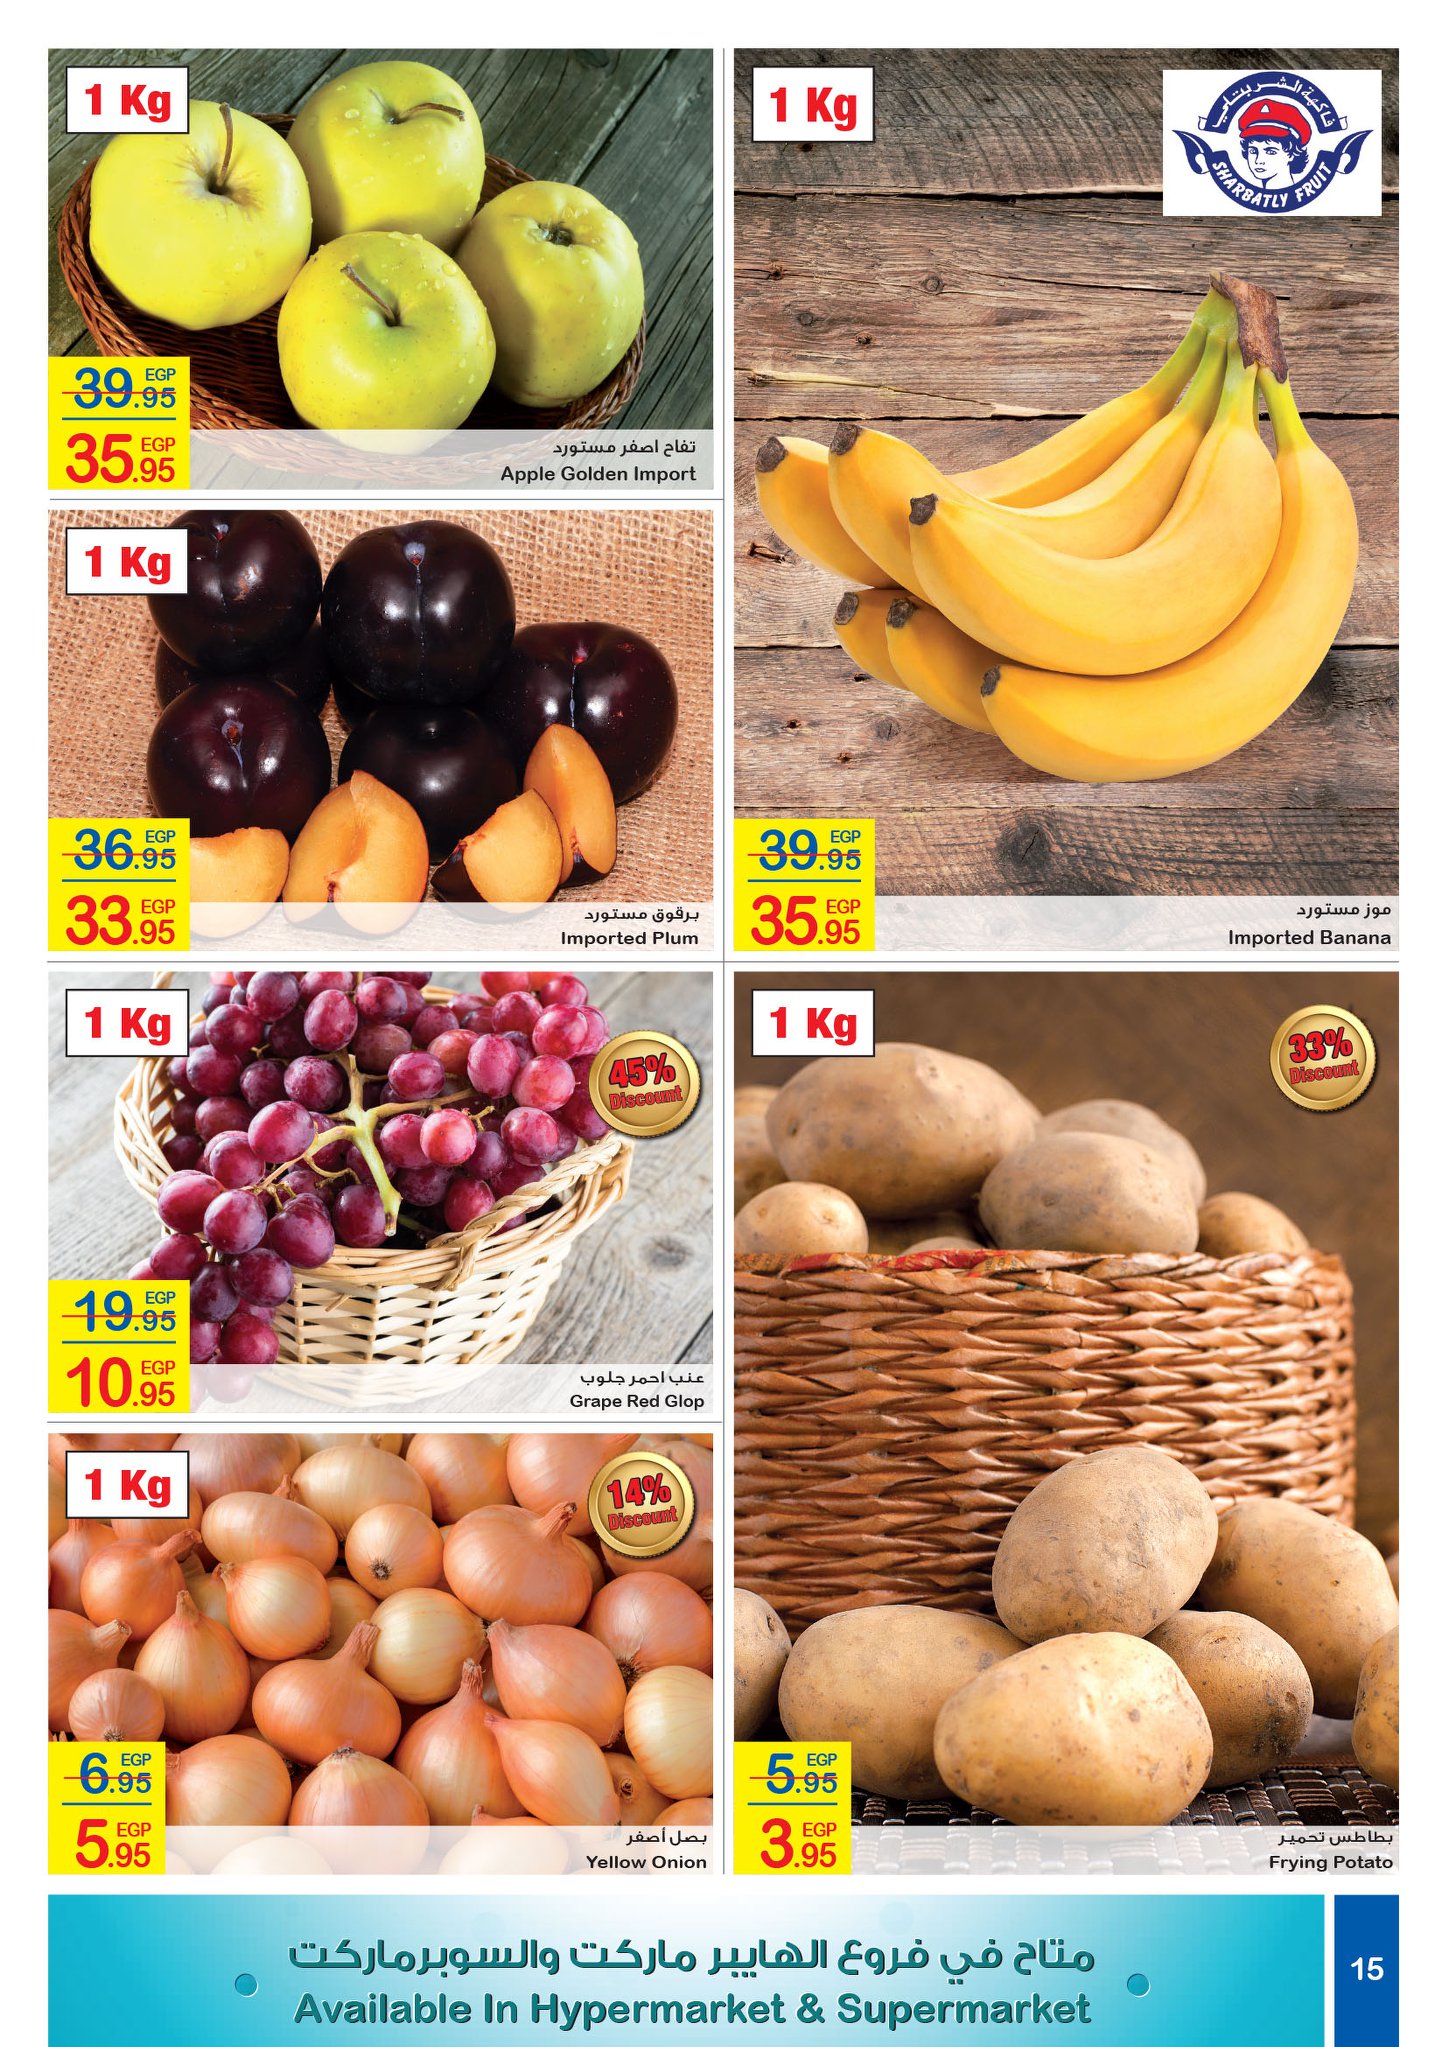 Carrefour Flyer from 16/7 till 27/7 | Carrefour Egypt 15